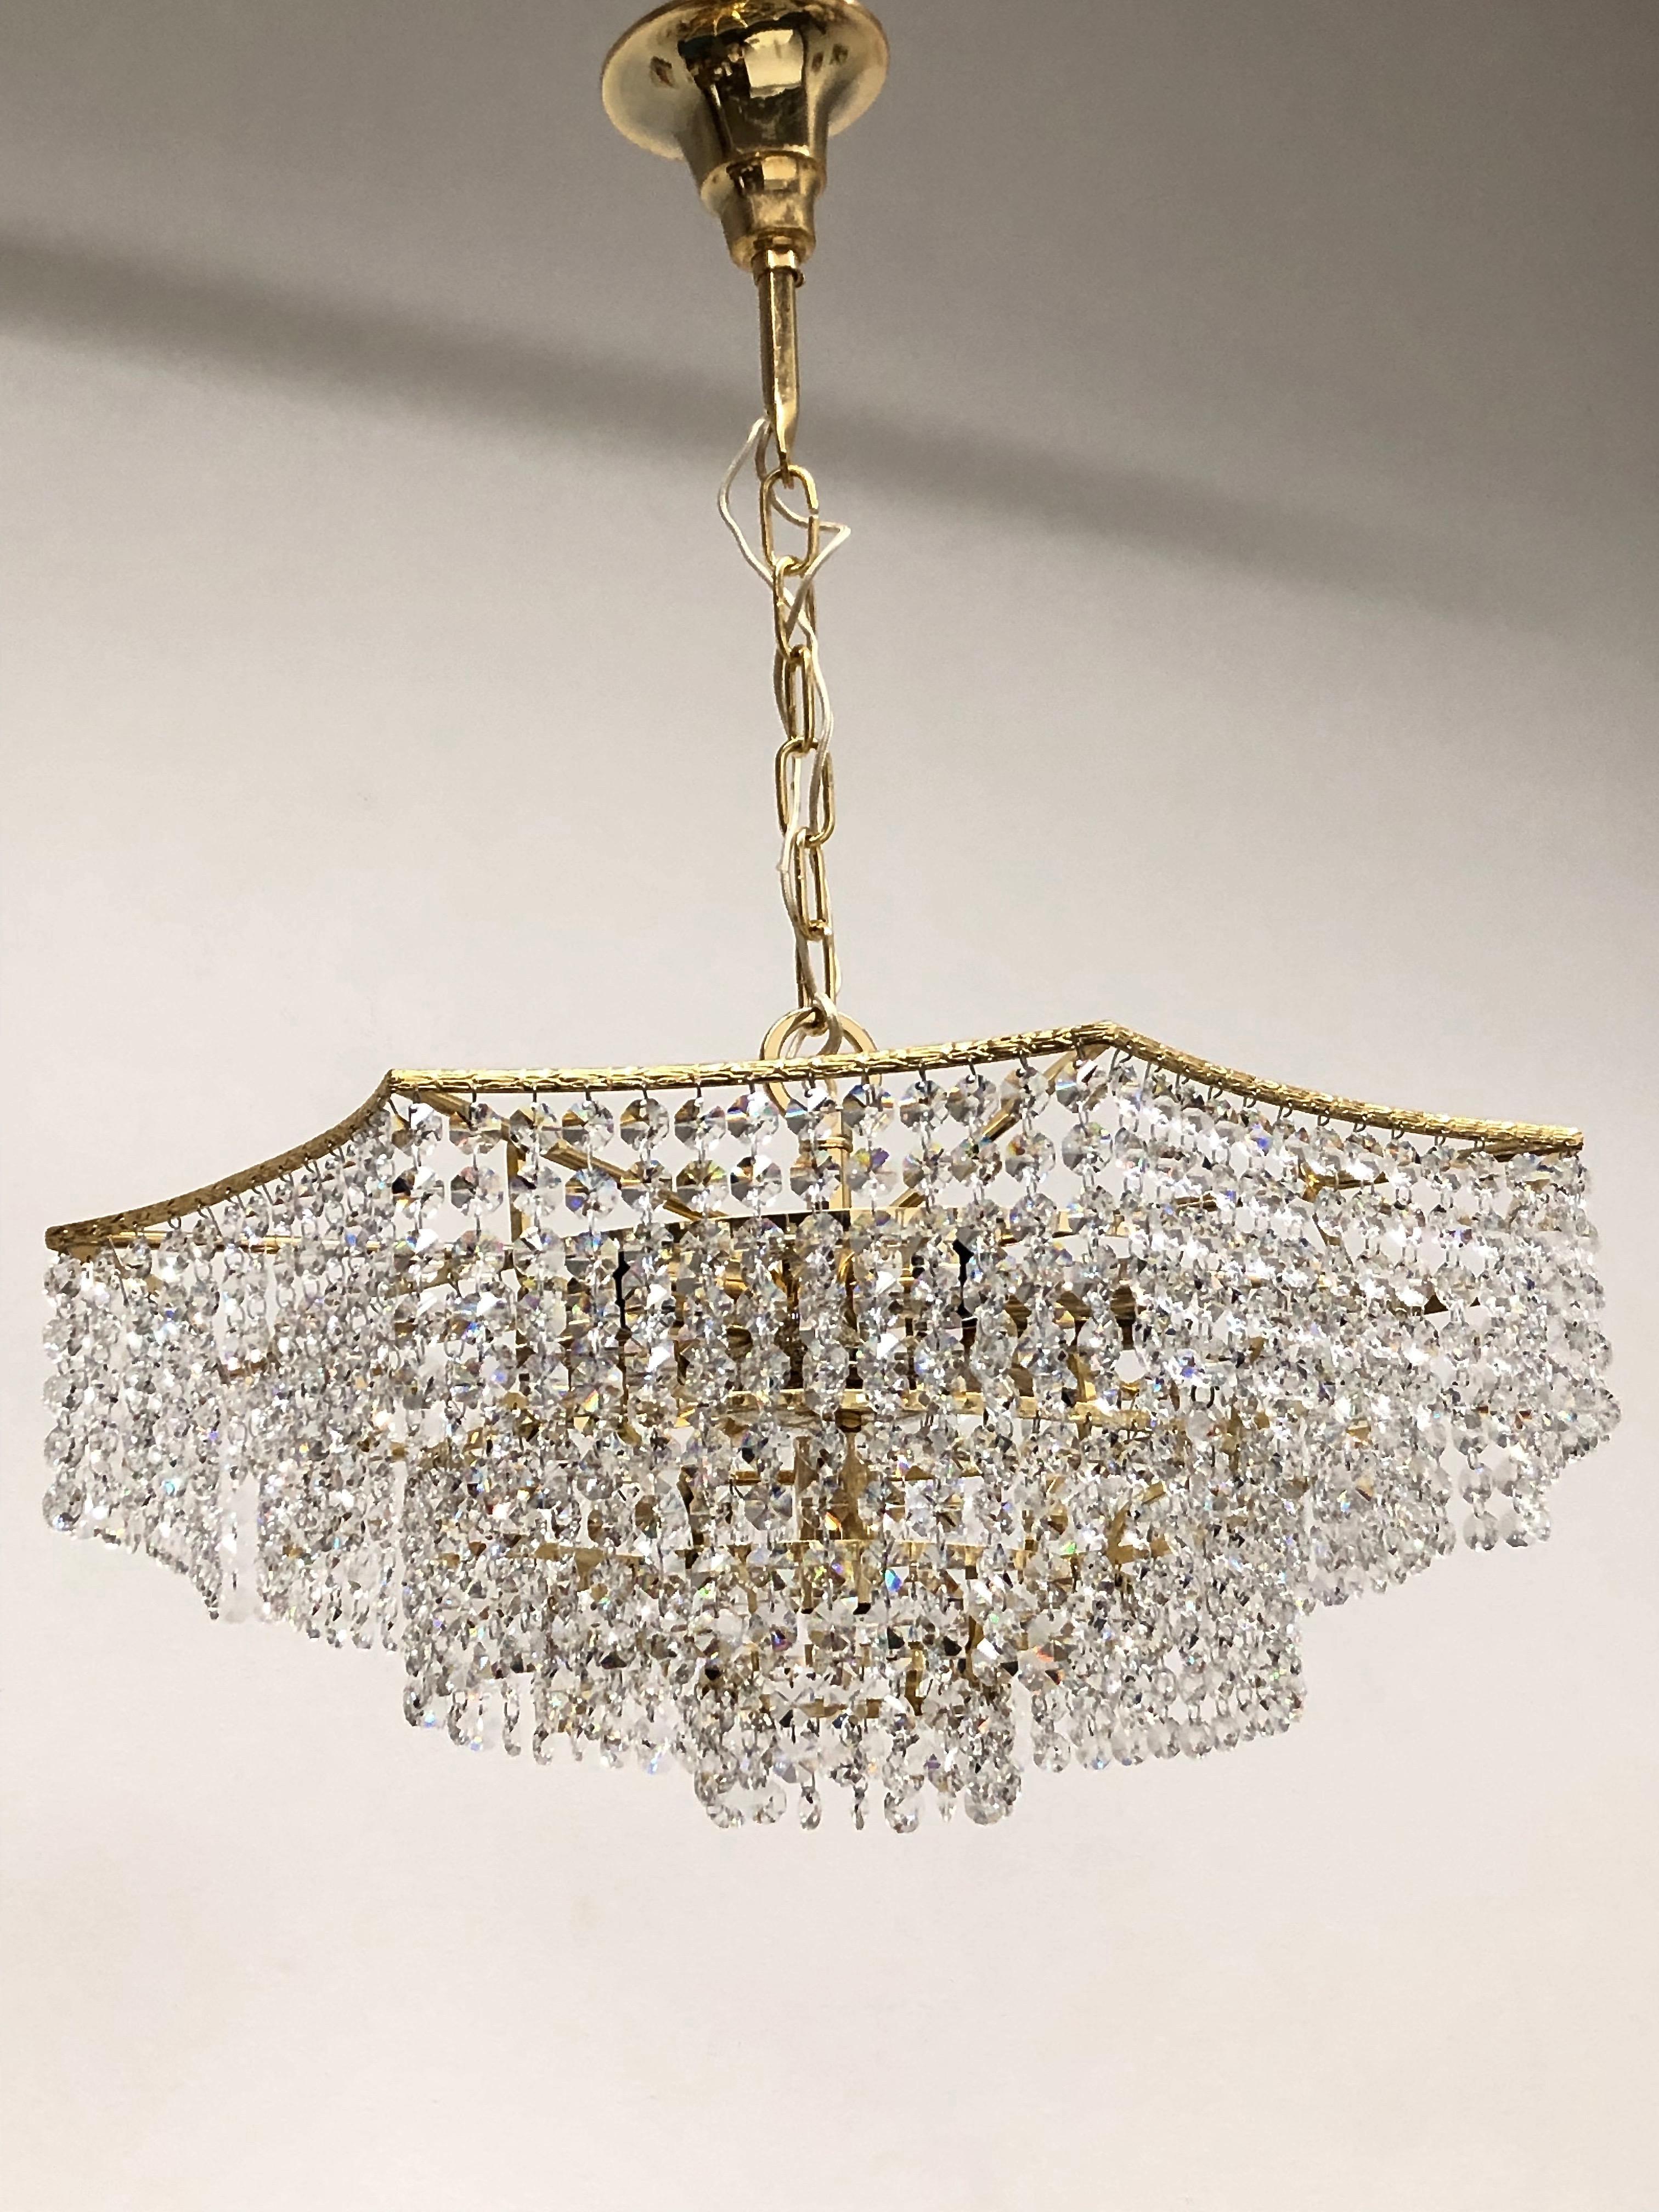 A beautiful 5-tiered brass and crystal glass chandelier made by Richard Essig, Germany, 1960s. The chandelier requires seven European E14 candelabra bulbs, each up to 40 watts. It is made of cut crystals and a brass frame, brass frame is gold